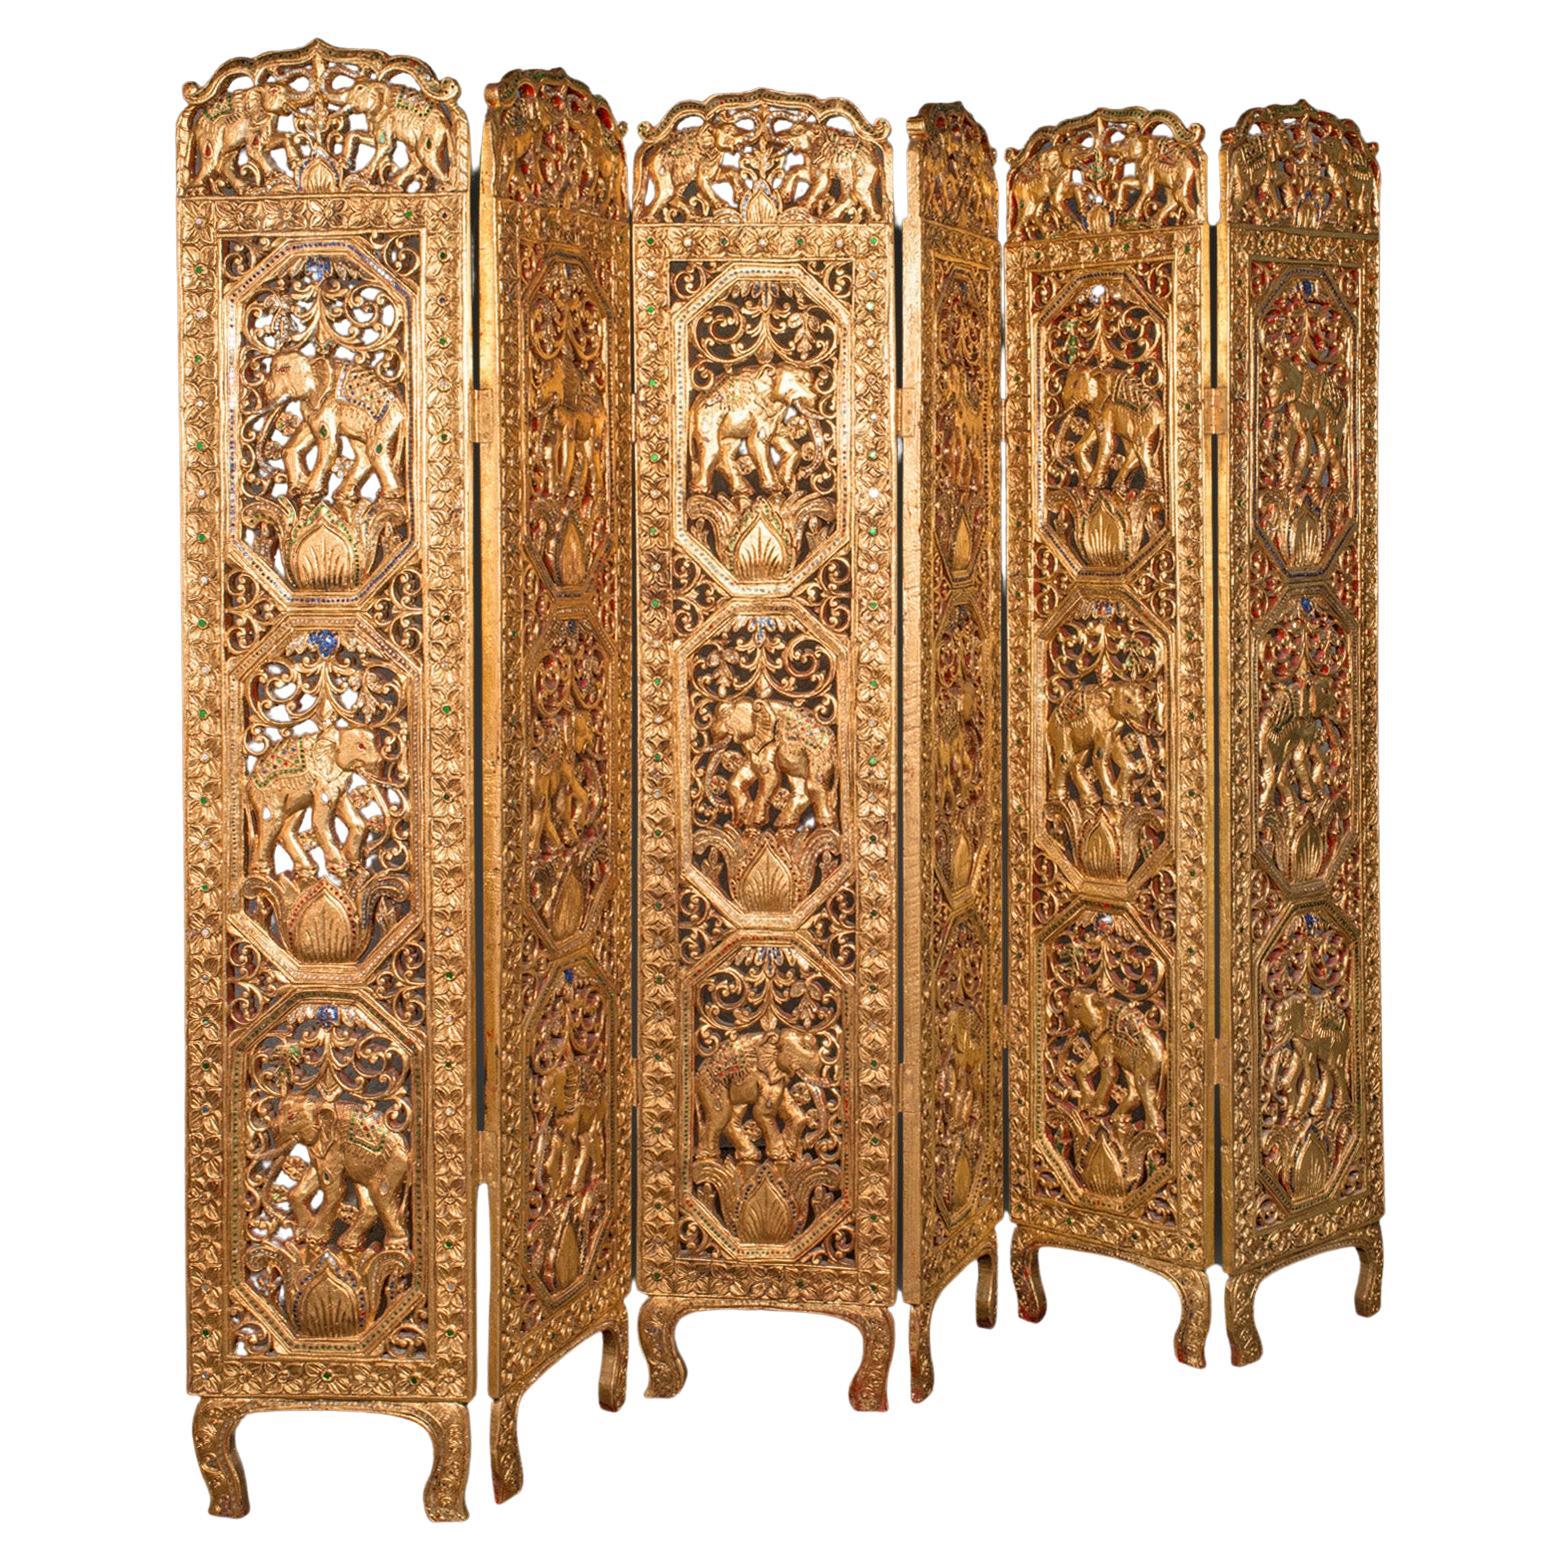 Antique Ornate Privacy Screen, Indian, Gilt, Six Panel Room Divider, Victorian